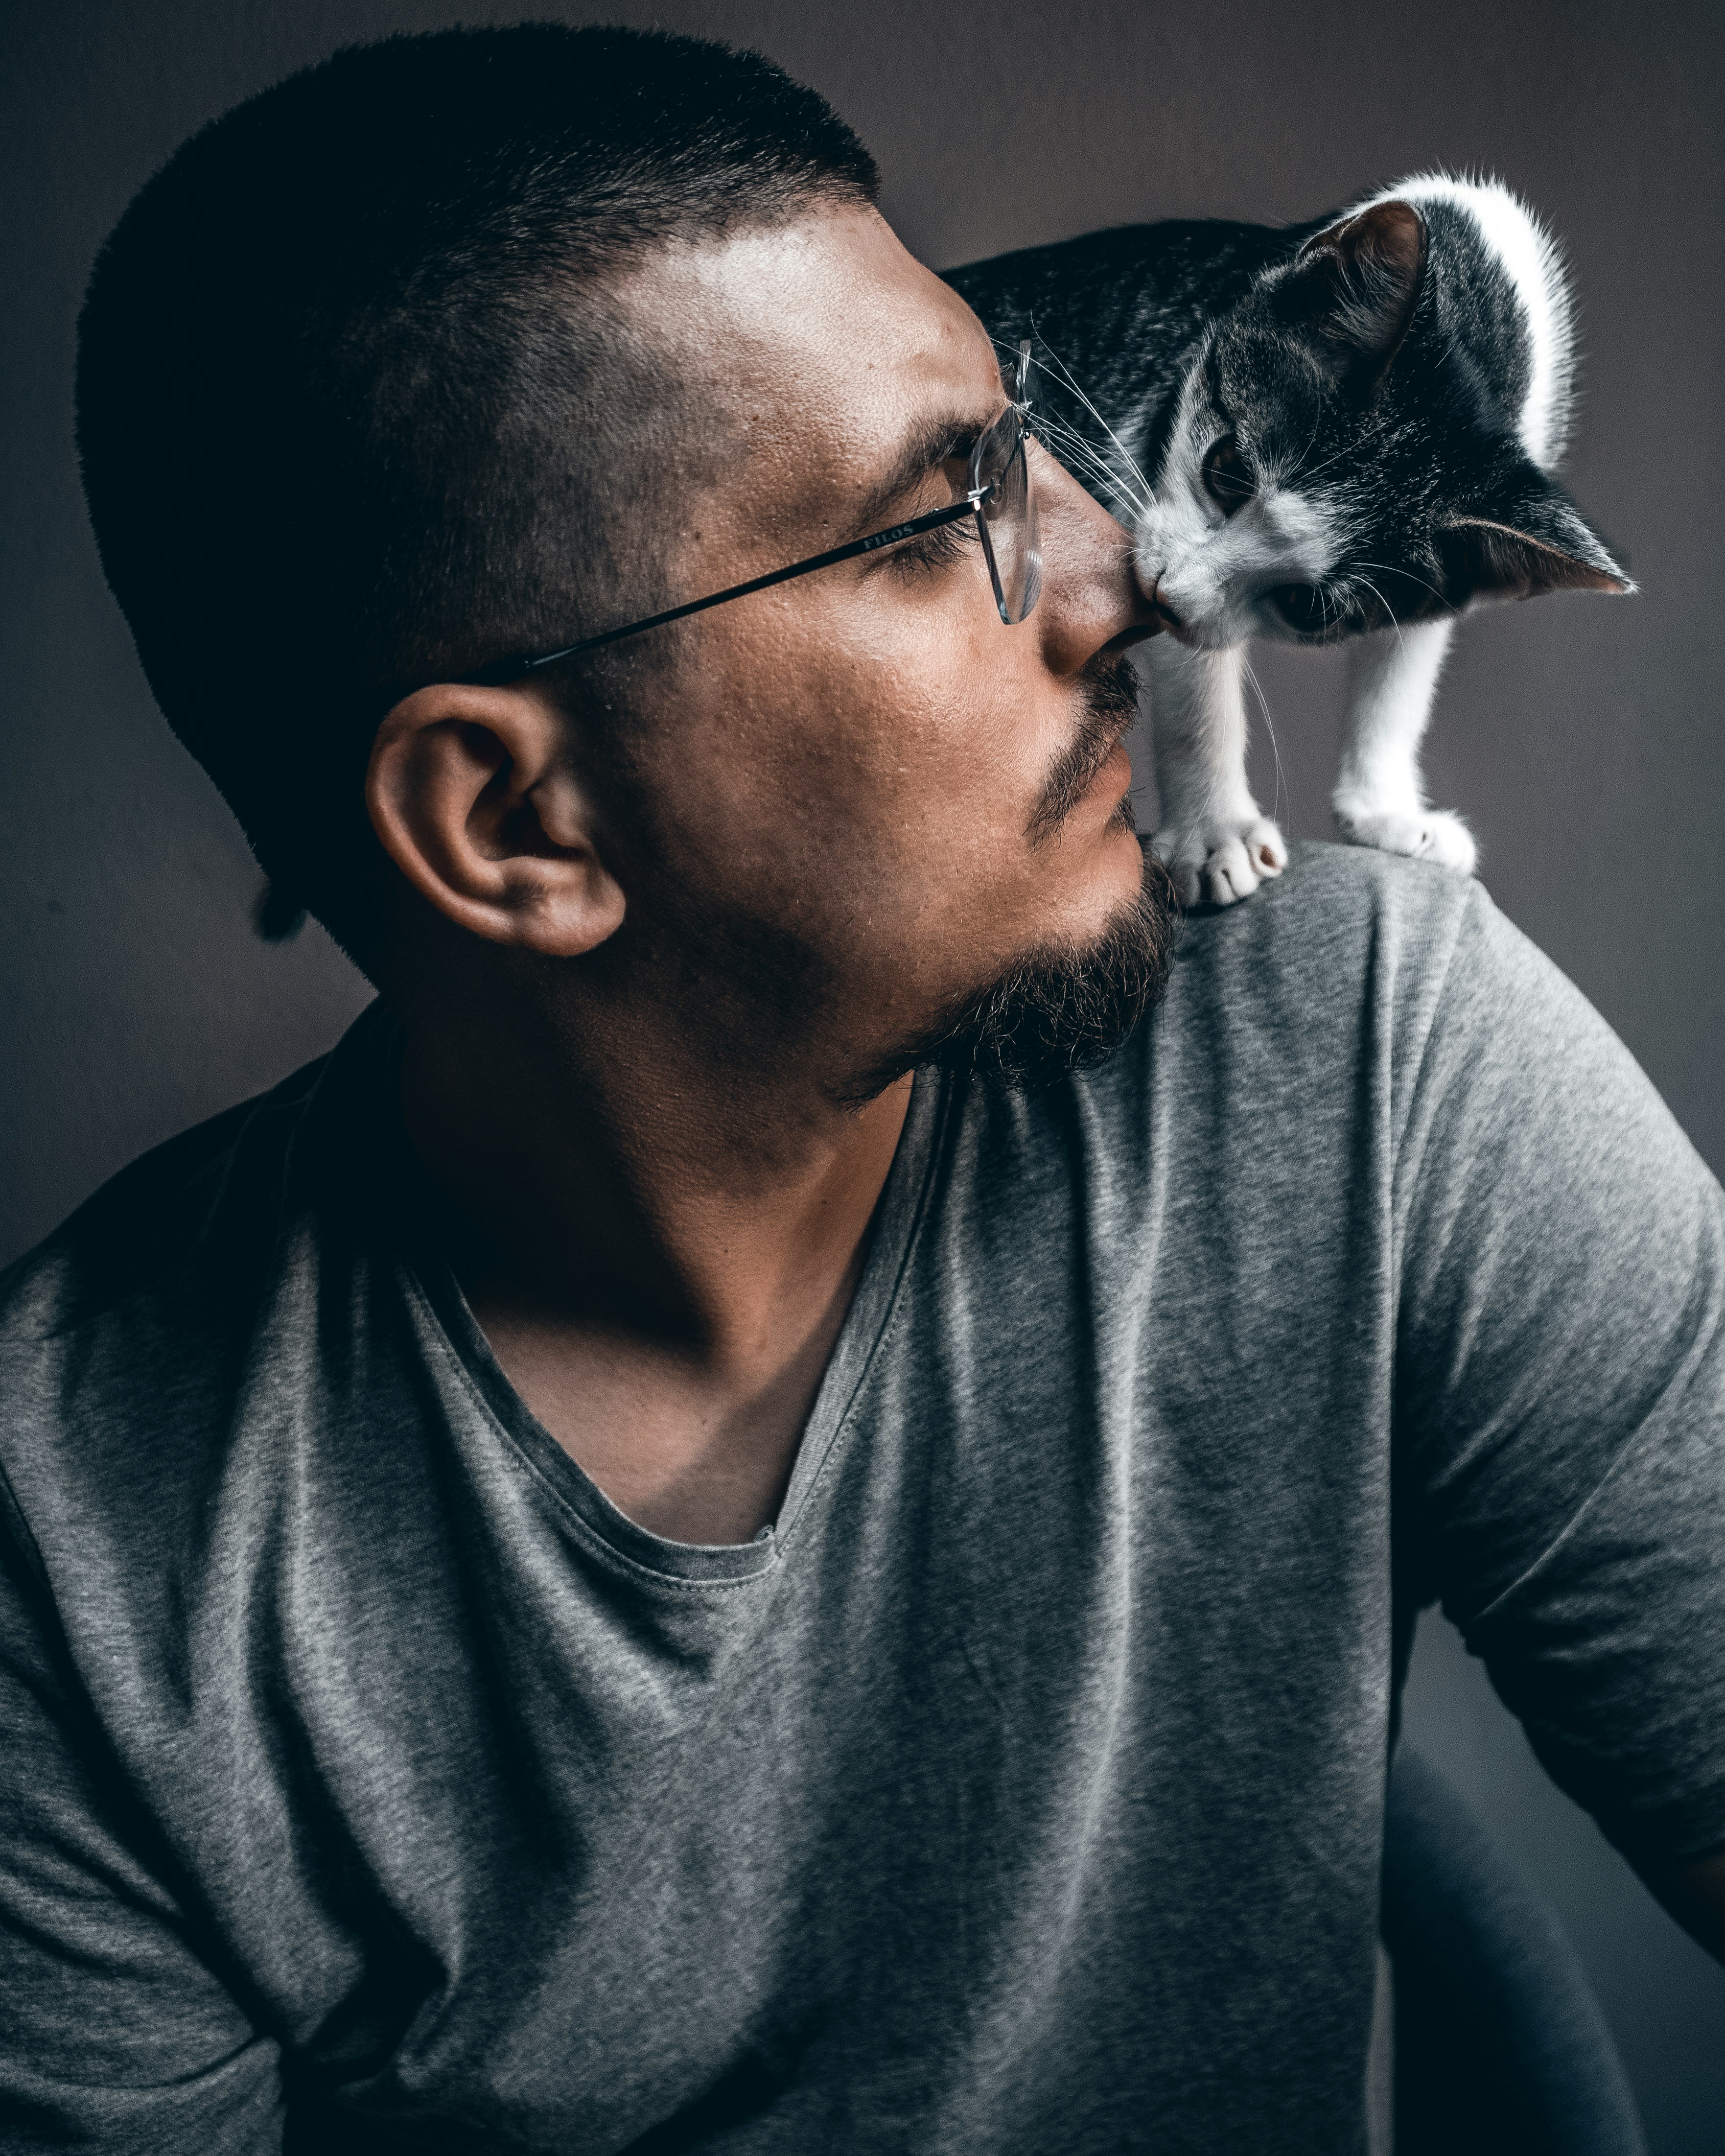 man in gray crew neck shirt holding white and black cat